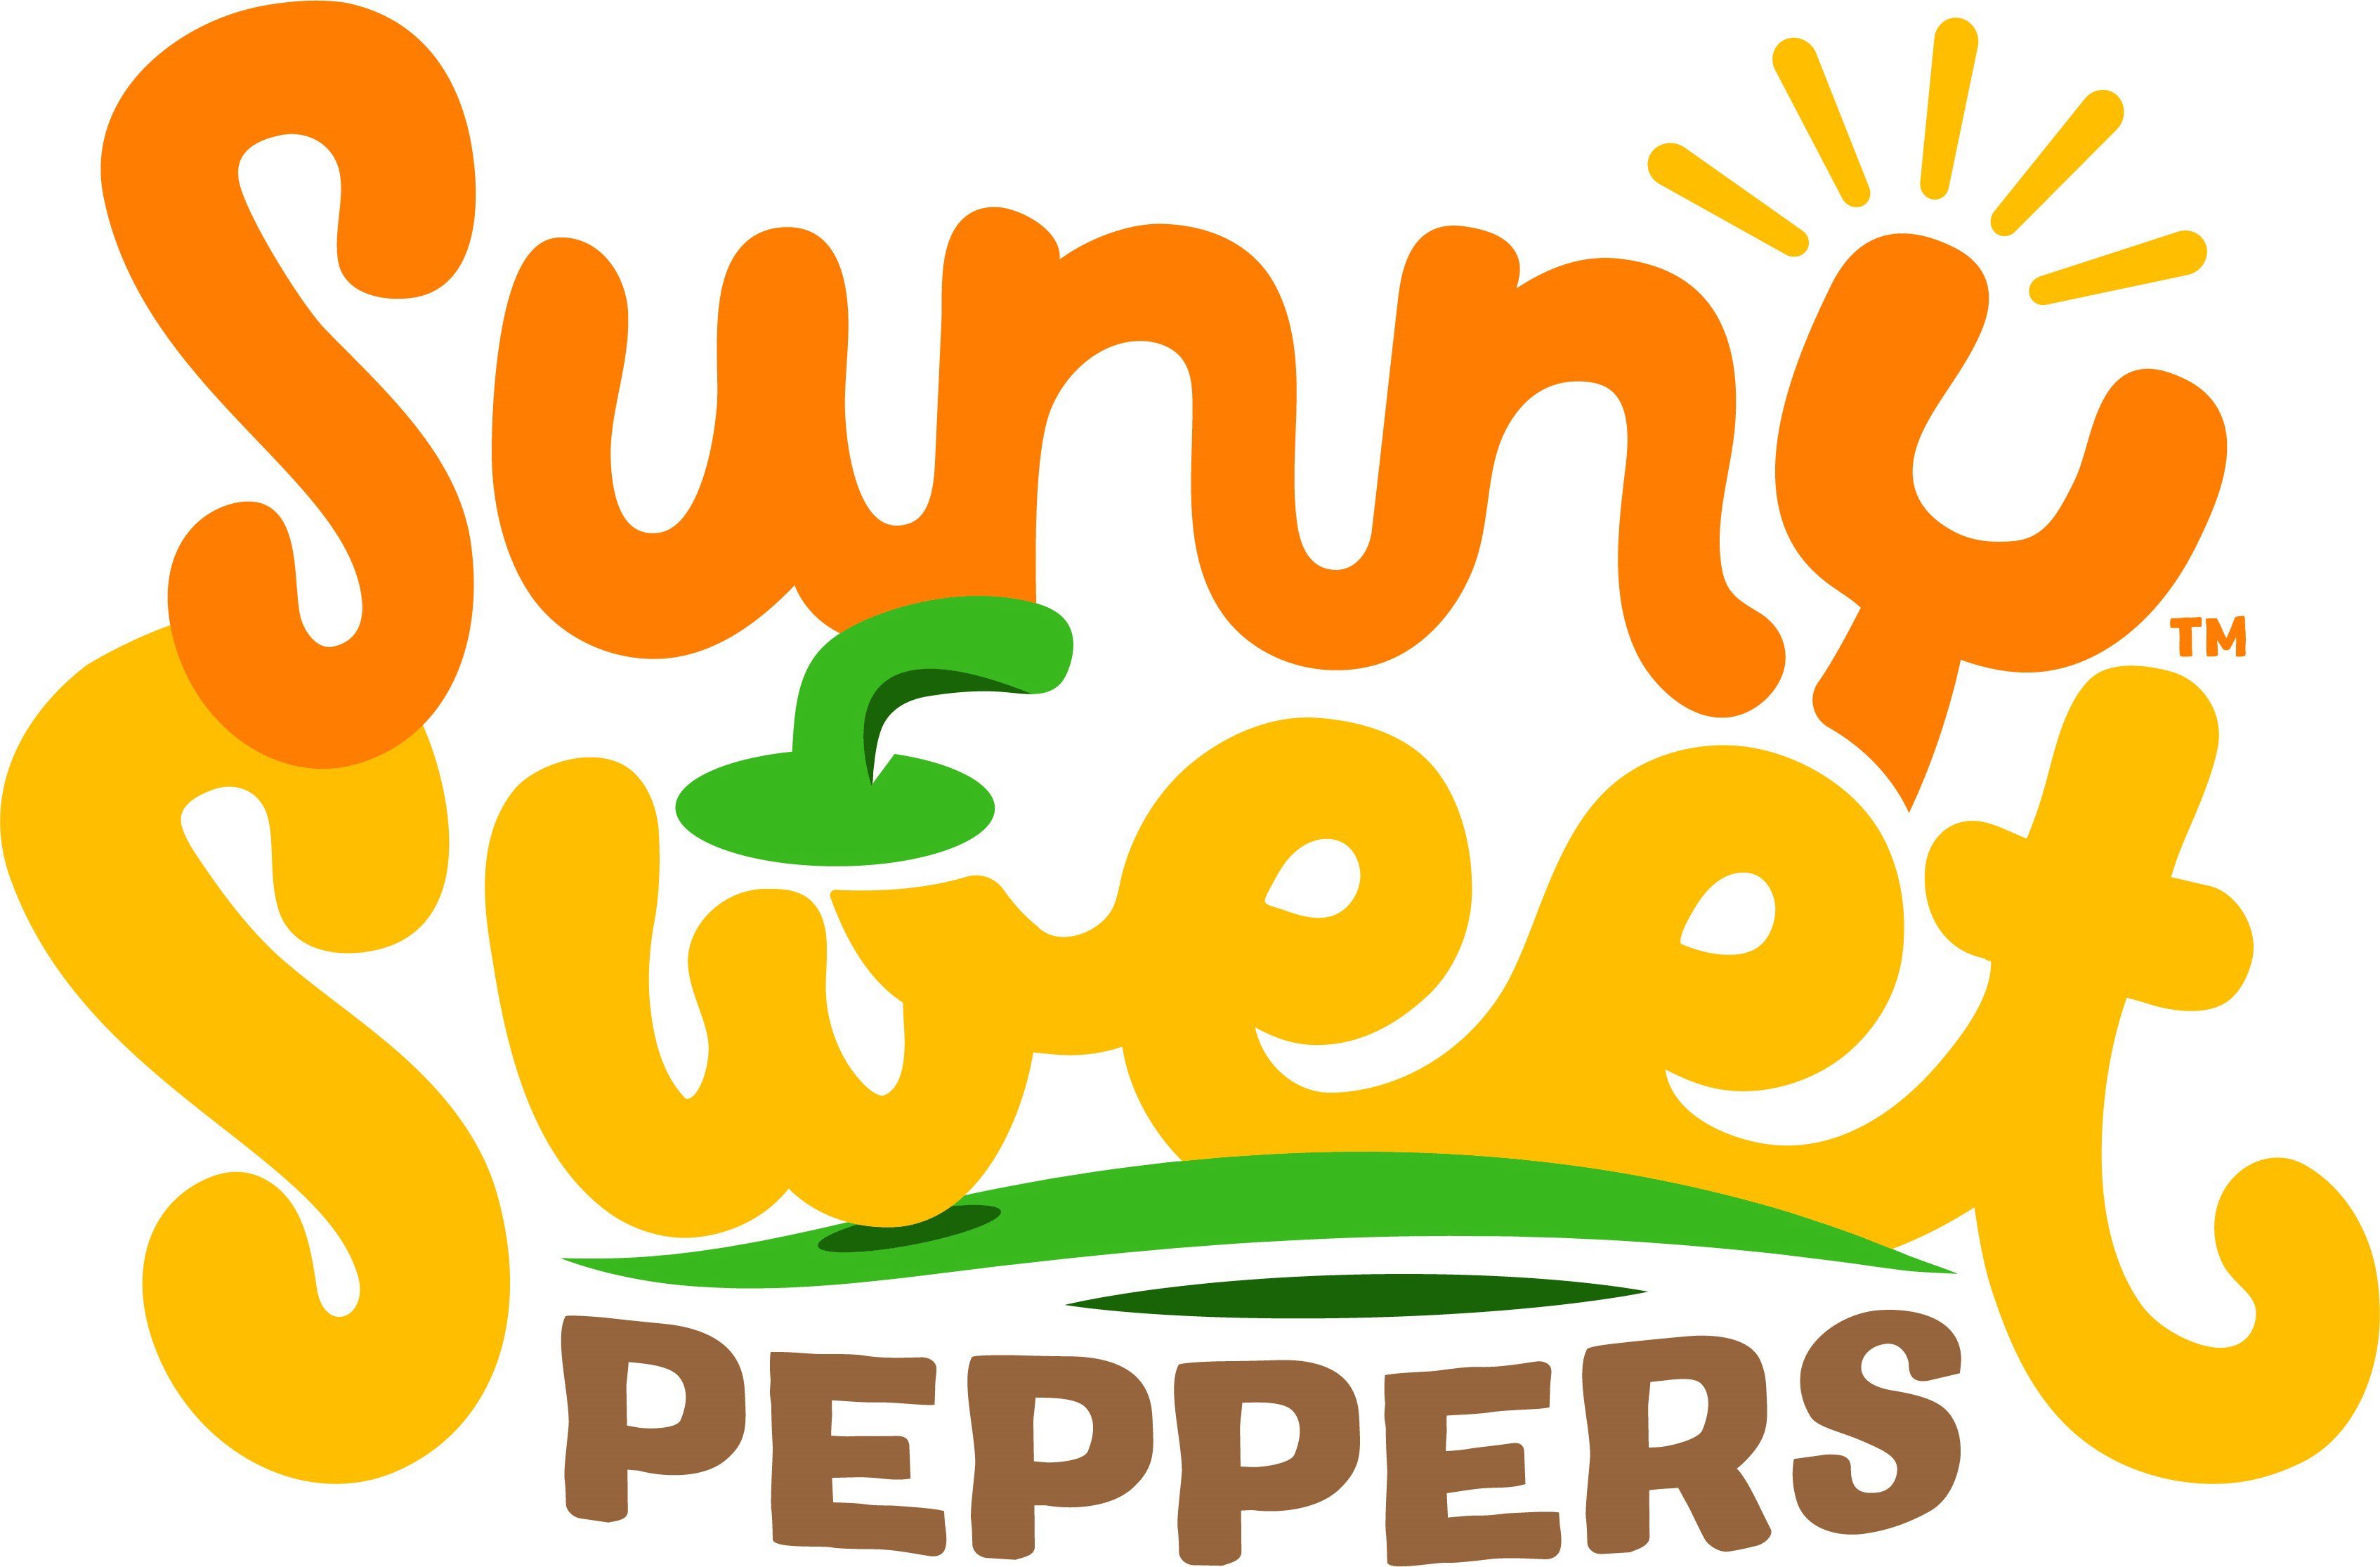  SUNNY SWEET PEPPERS